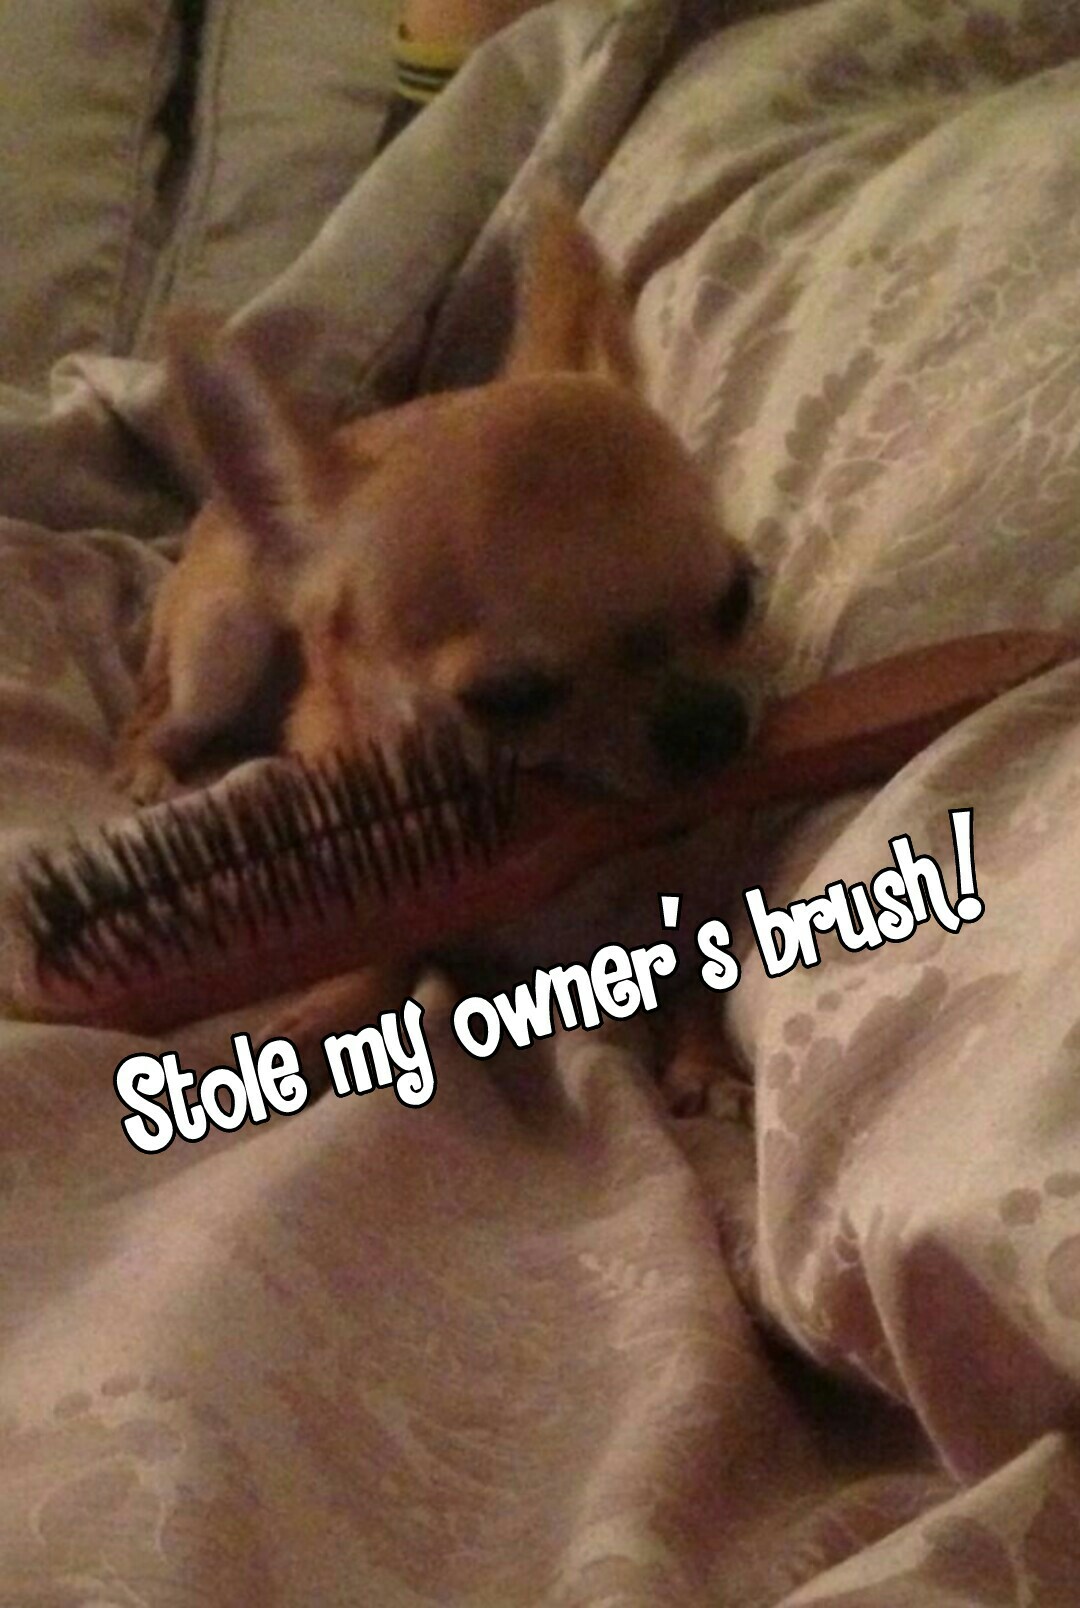 Stole my owner's brush!